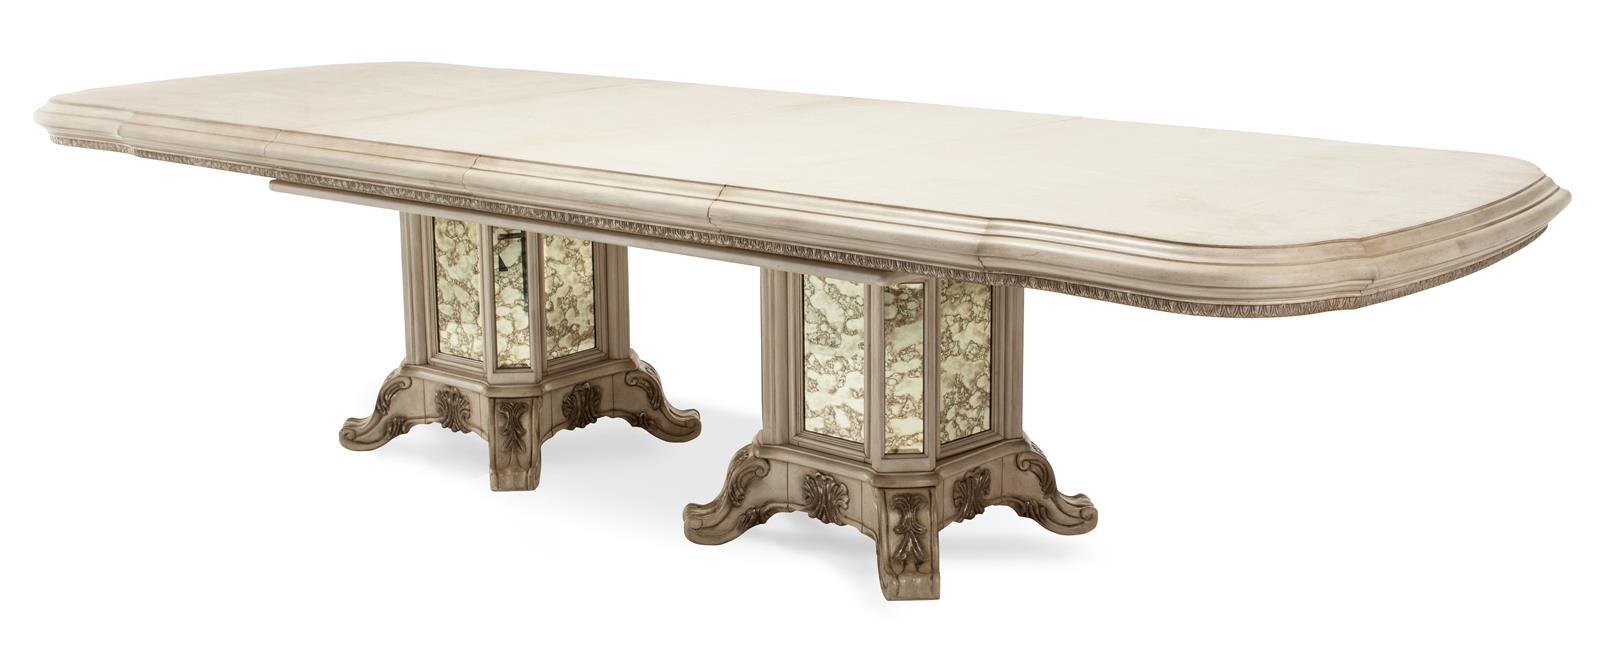 Platine de Royale Rectangular Wood Dining Table in Champagne 09002-201